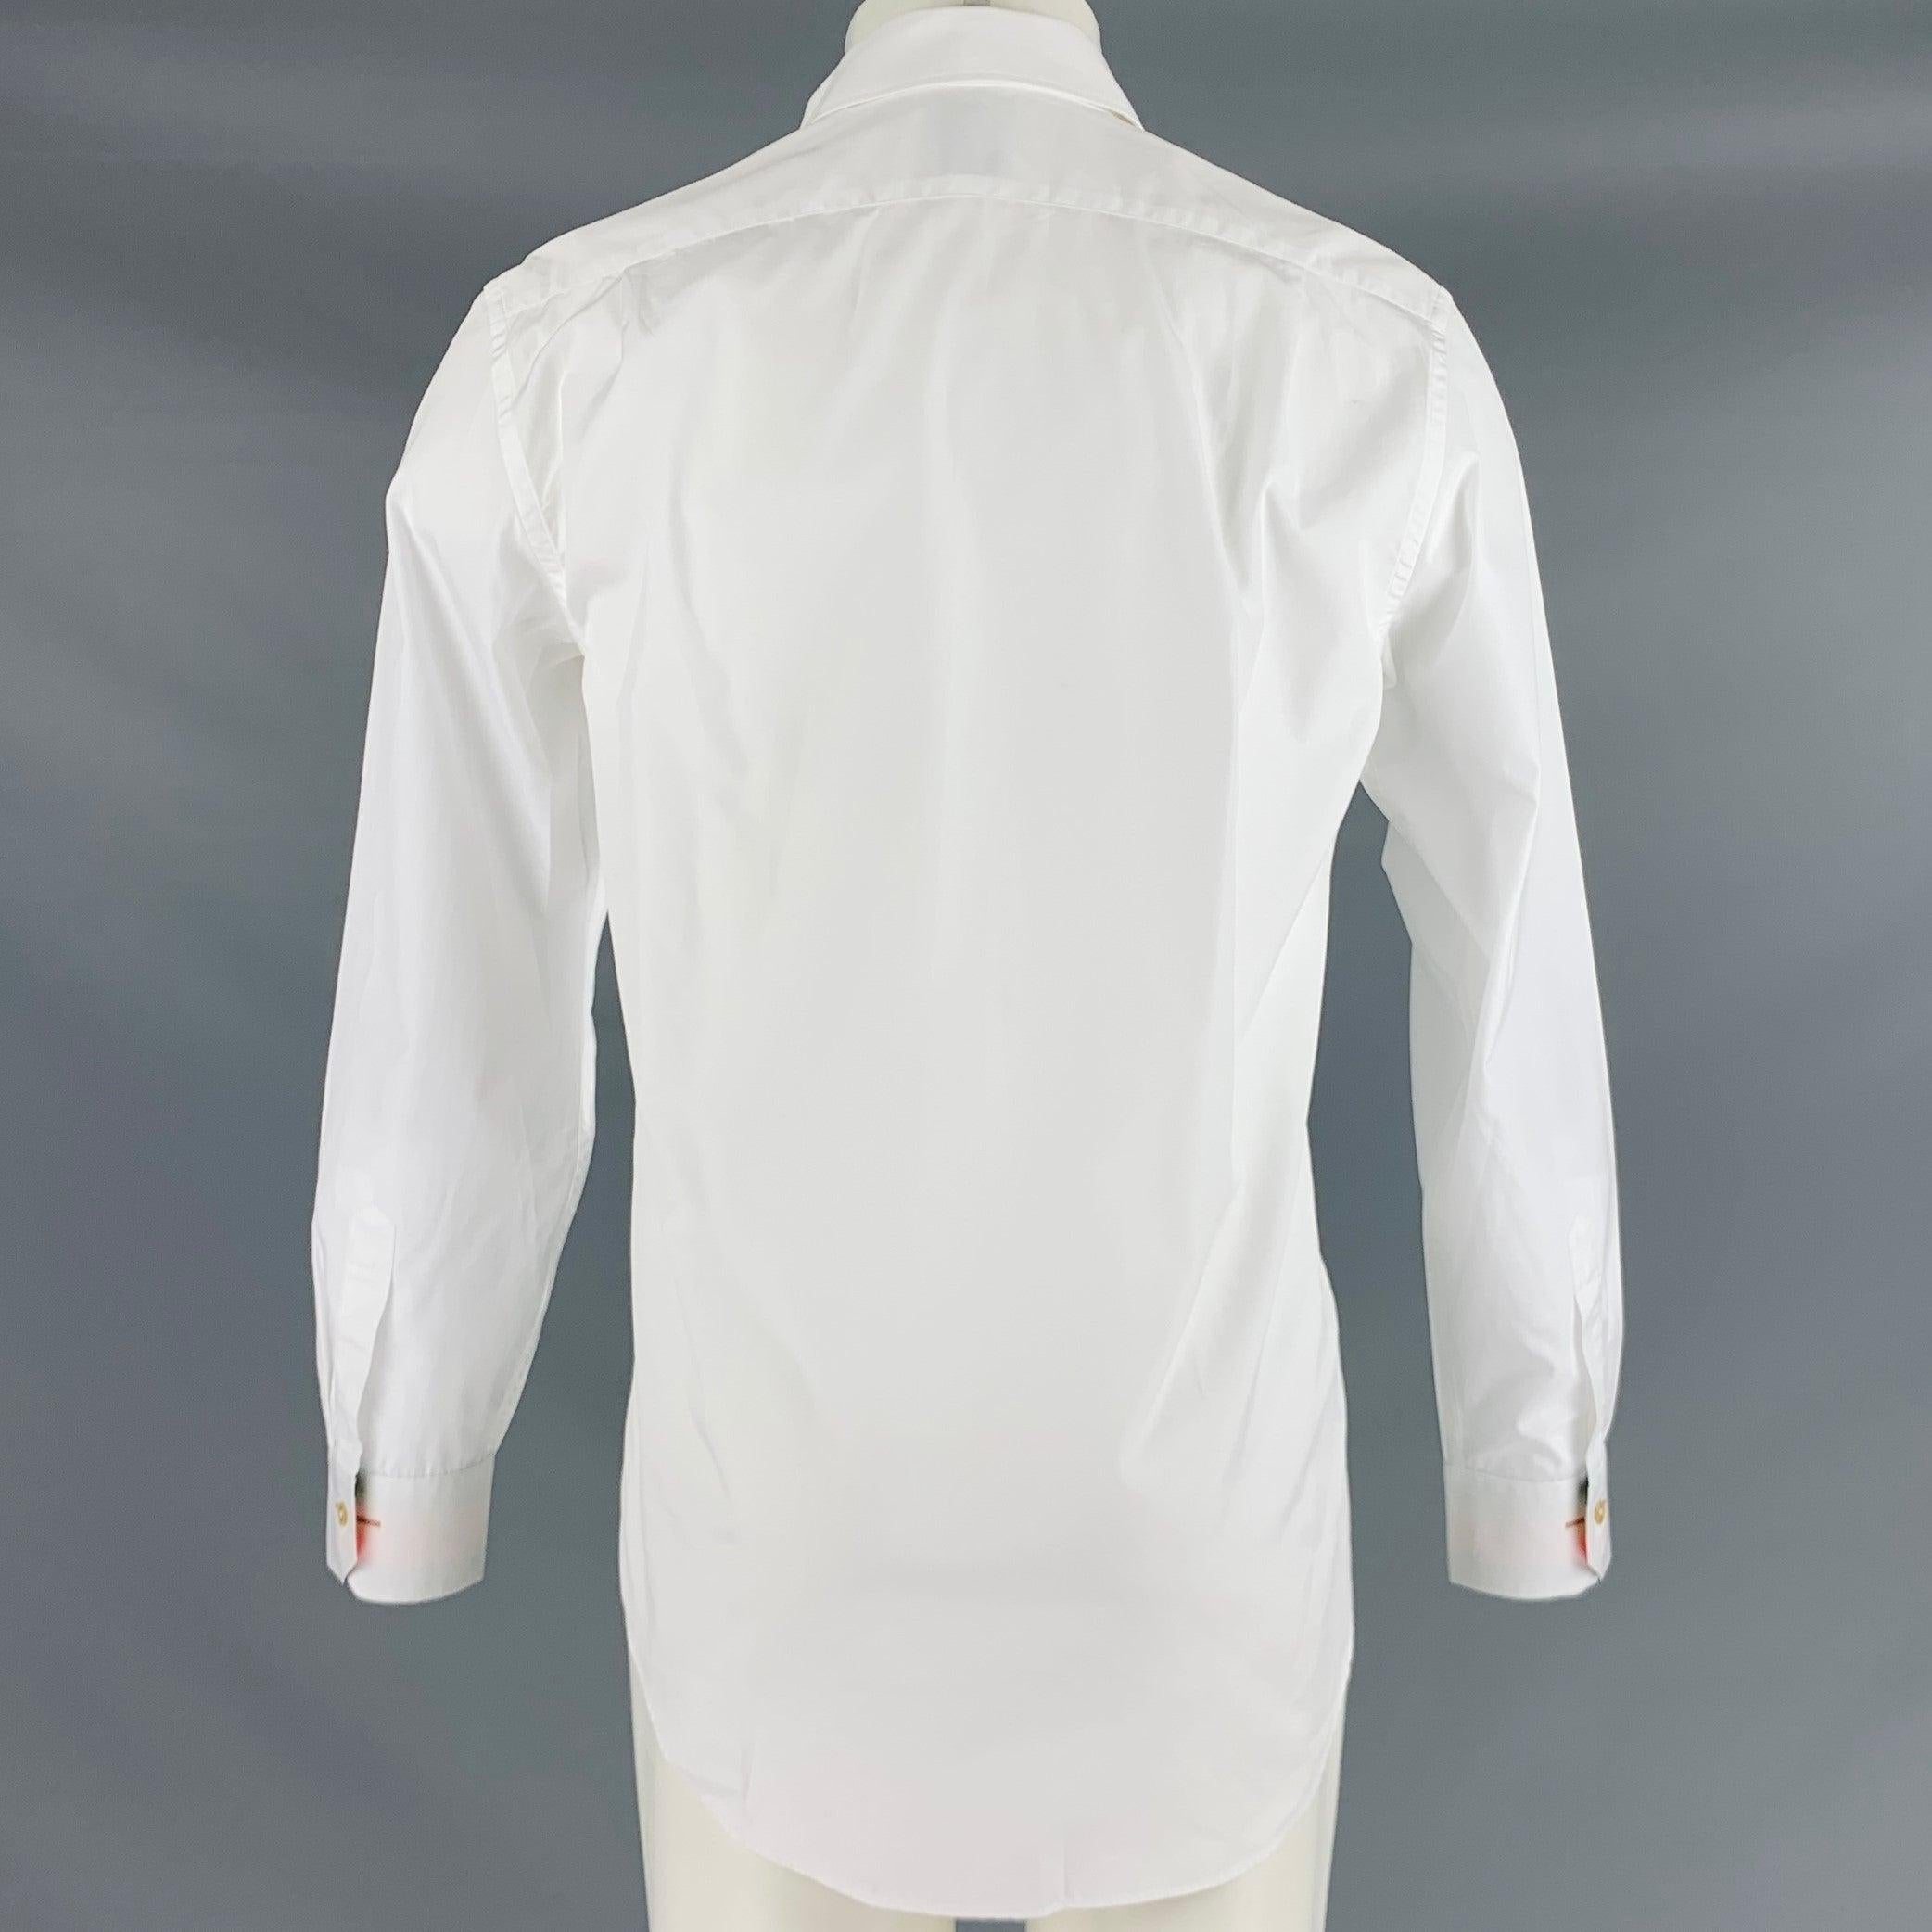 PAUL SMITH Size S White Cotton Blend Long Sleeve Shirt In Excellent Condition For Sale In San Francisco, CA